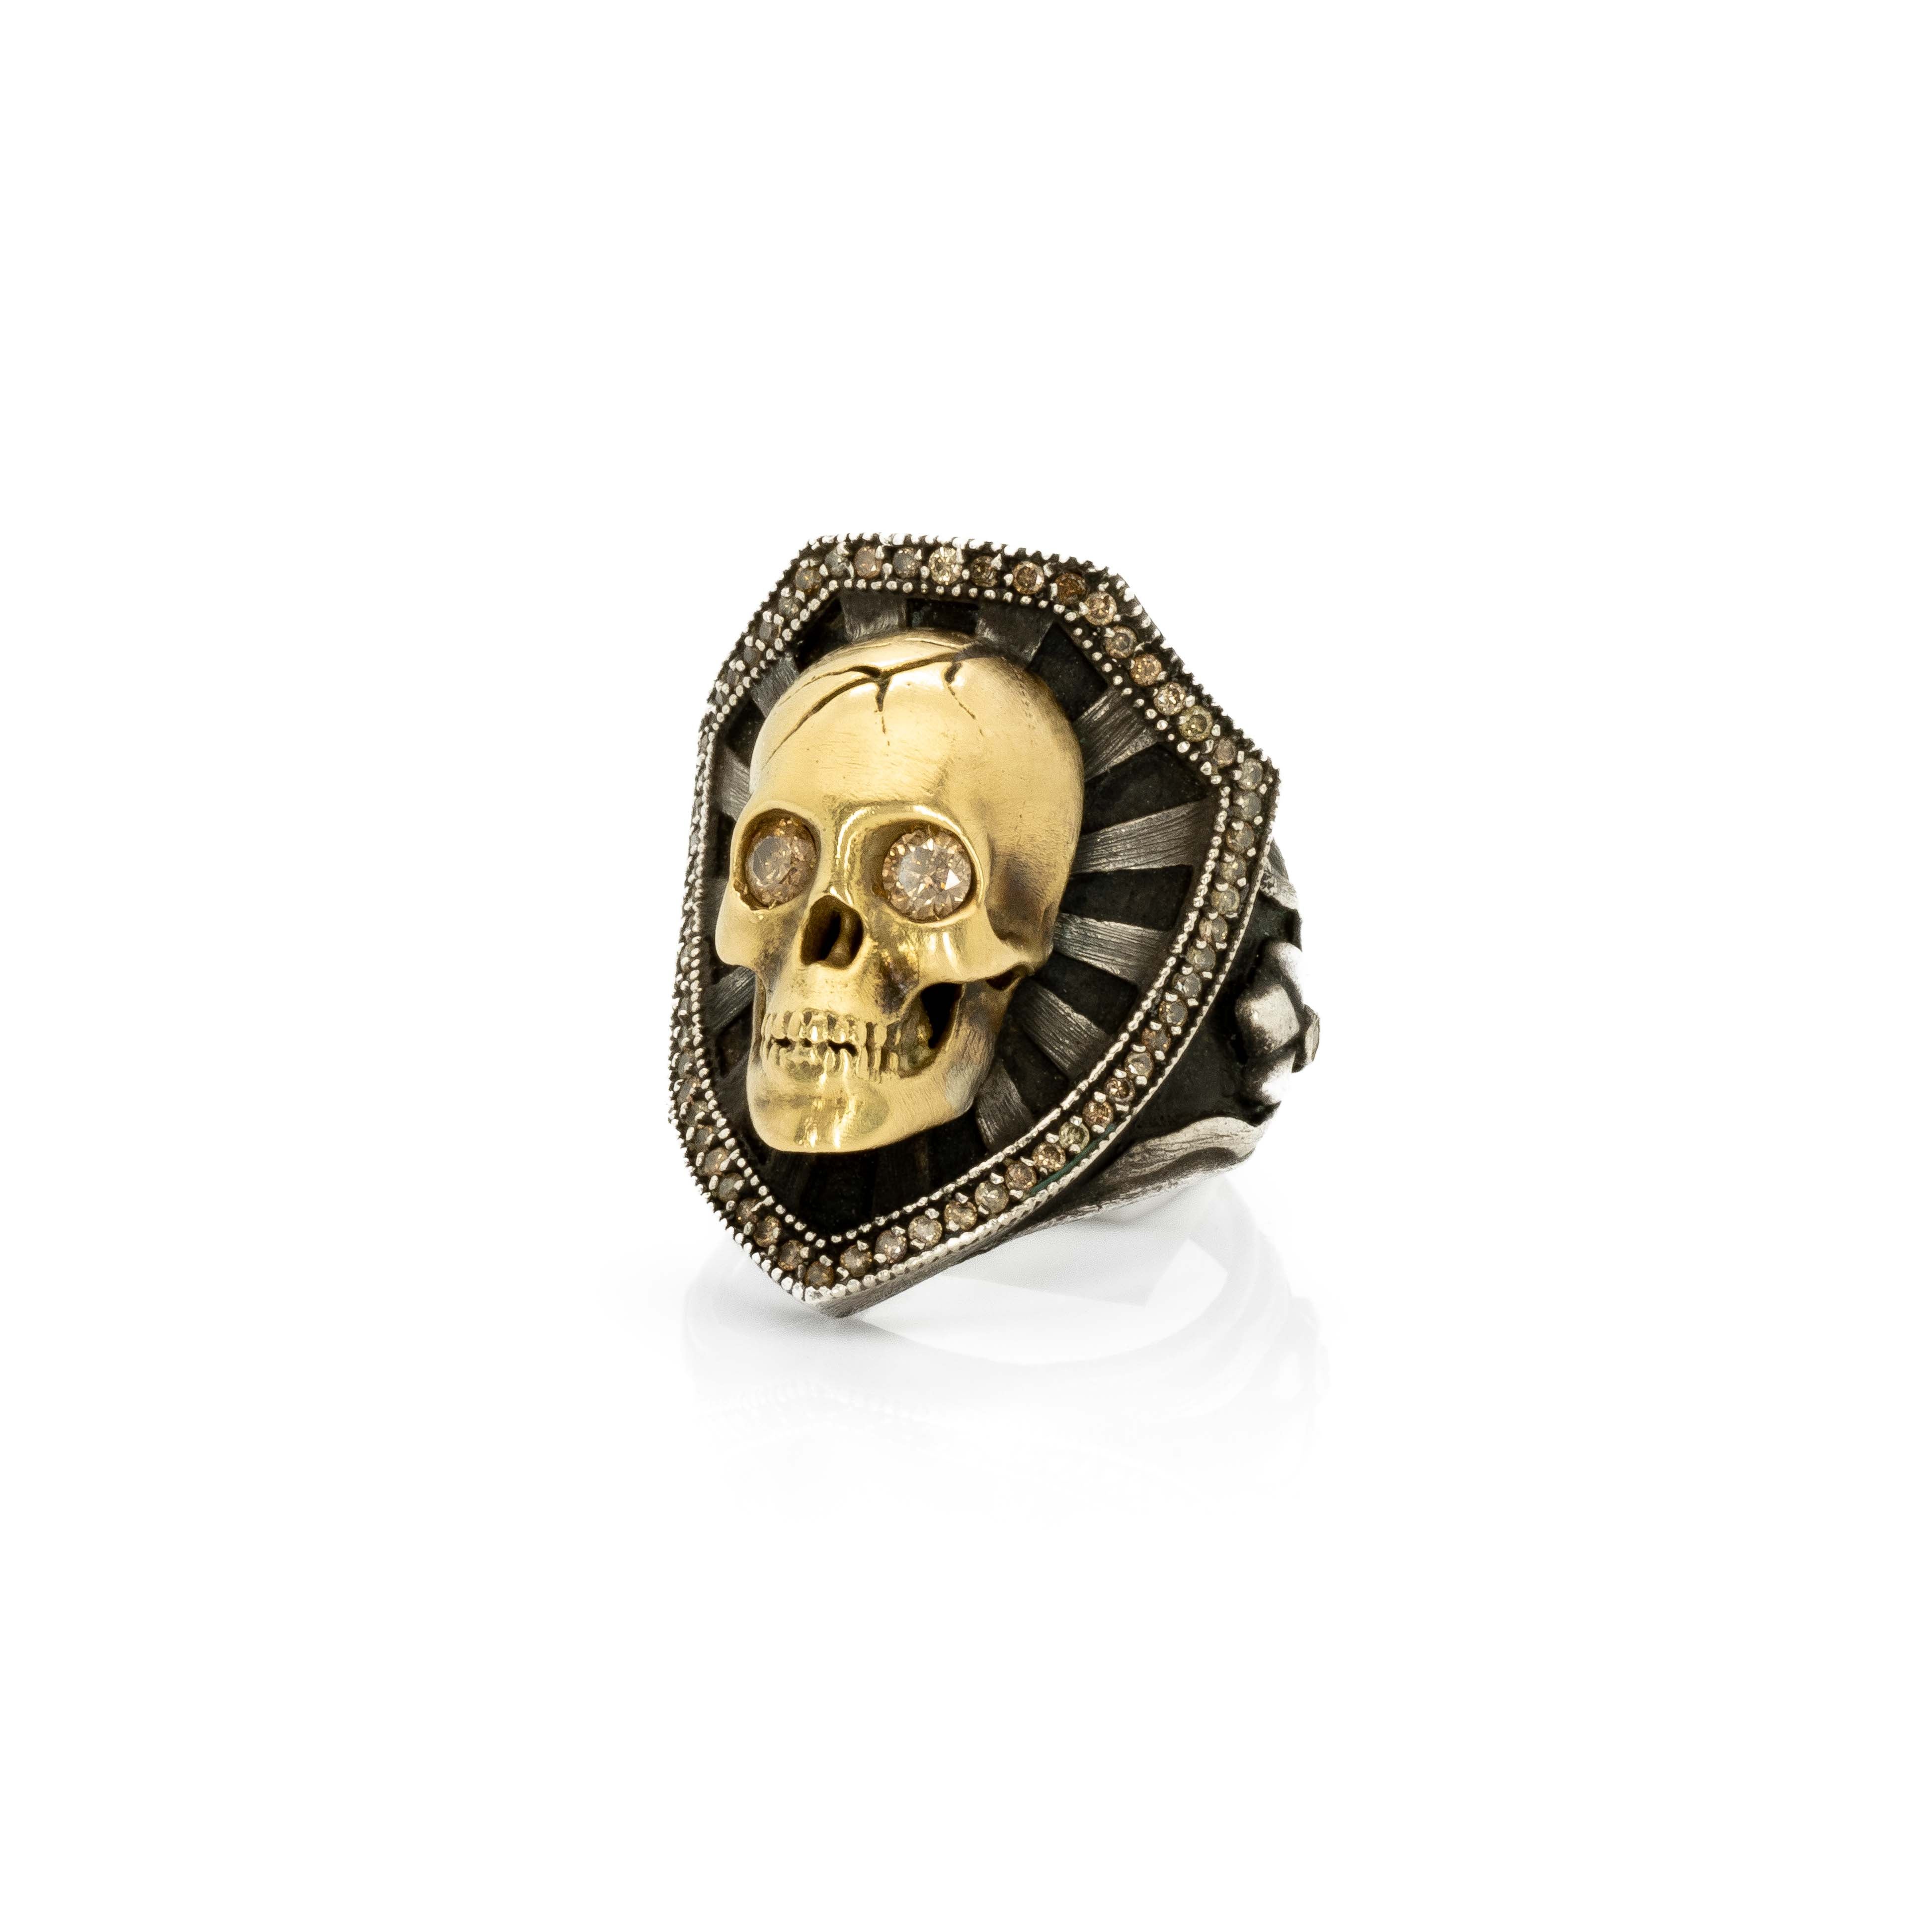 The Skull & Shield ring features a gorgeous 18k gold skull and a medieval shield made of oxidized sterling silver, framed with brown diamonds. The eyes of the skull, also set with brown diamonds, adds a special glare to the ring.

Skull & Shield